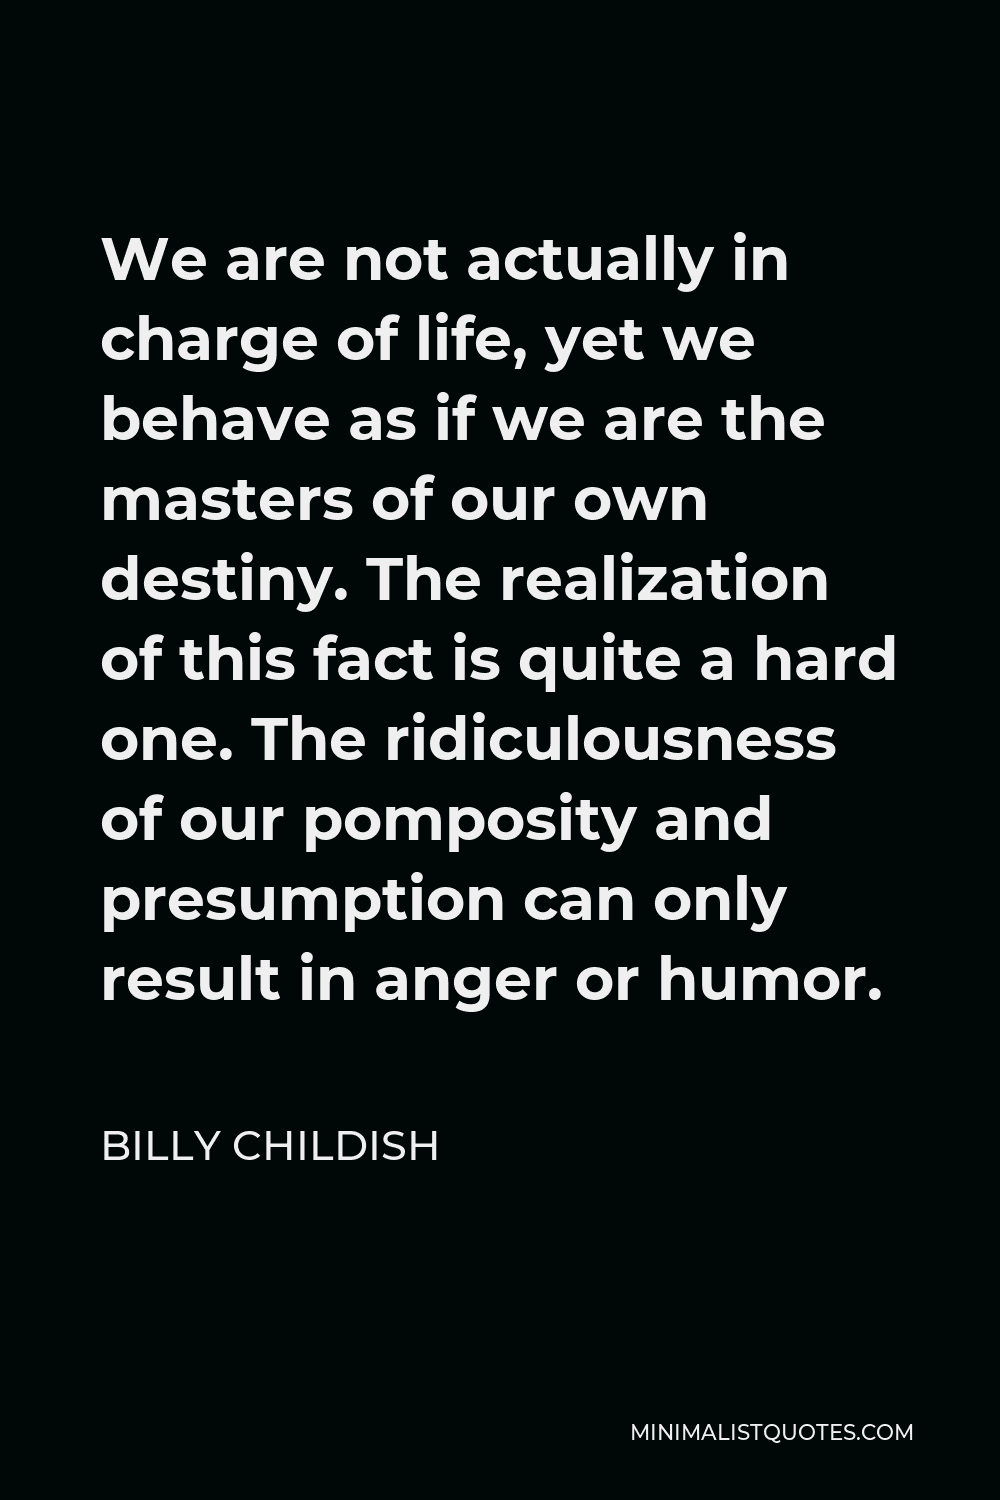 Billy Childish Quote - We are not actually in charge of life, yet we behave as if we are the masters of our own destiny. The realization of this fact is quite a hard one. The ridiculousness of our pomposity and presumption can only result in anger or humor.